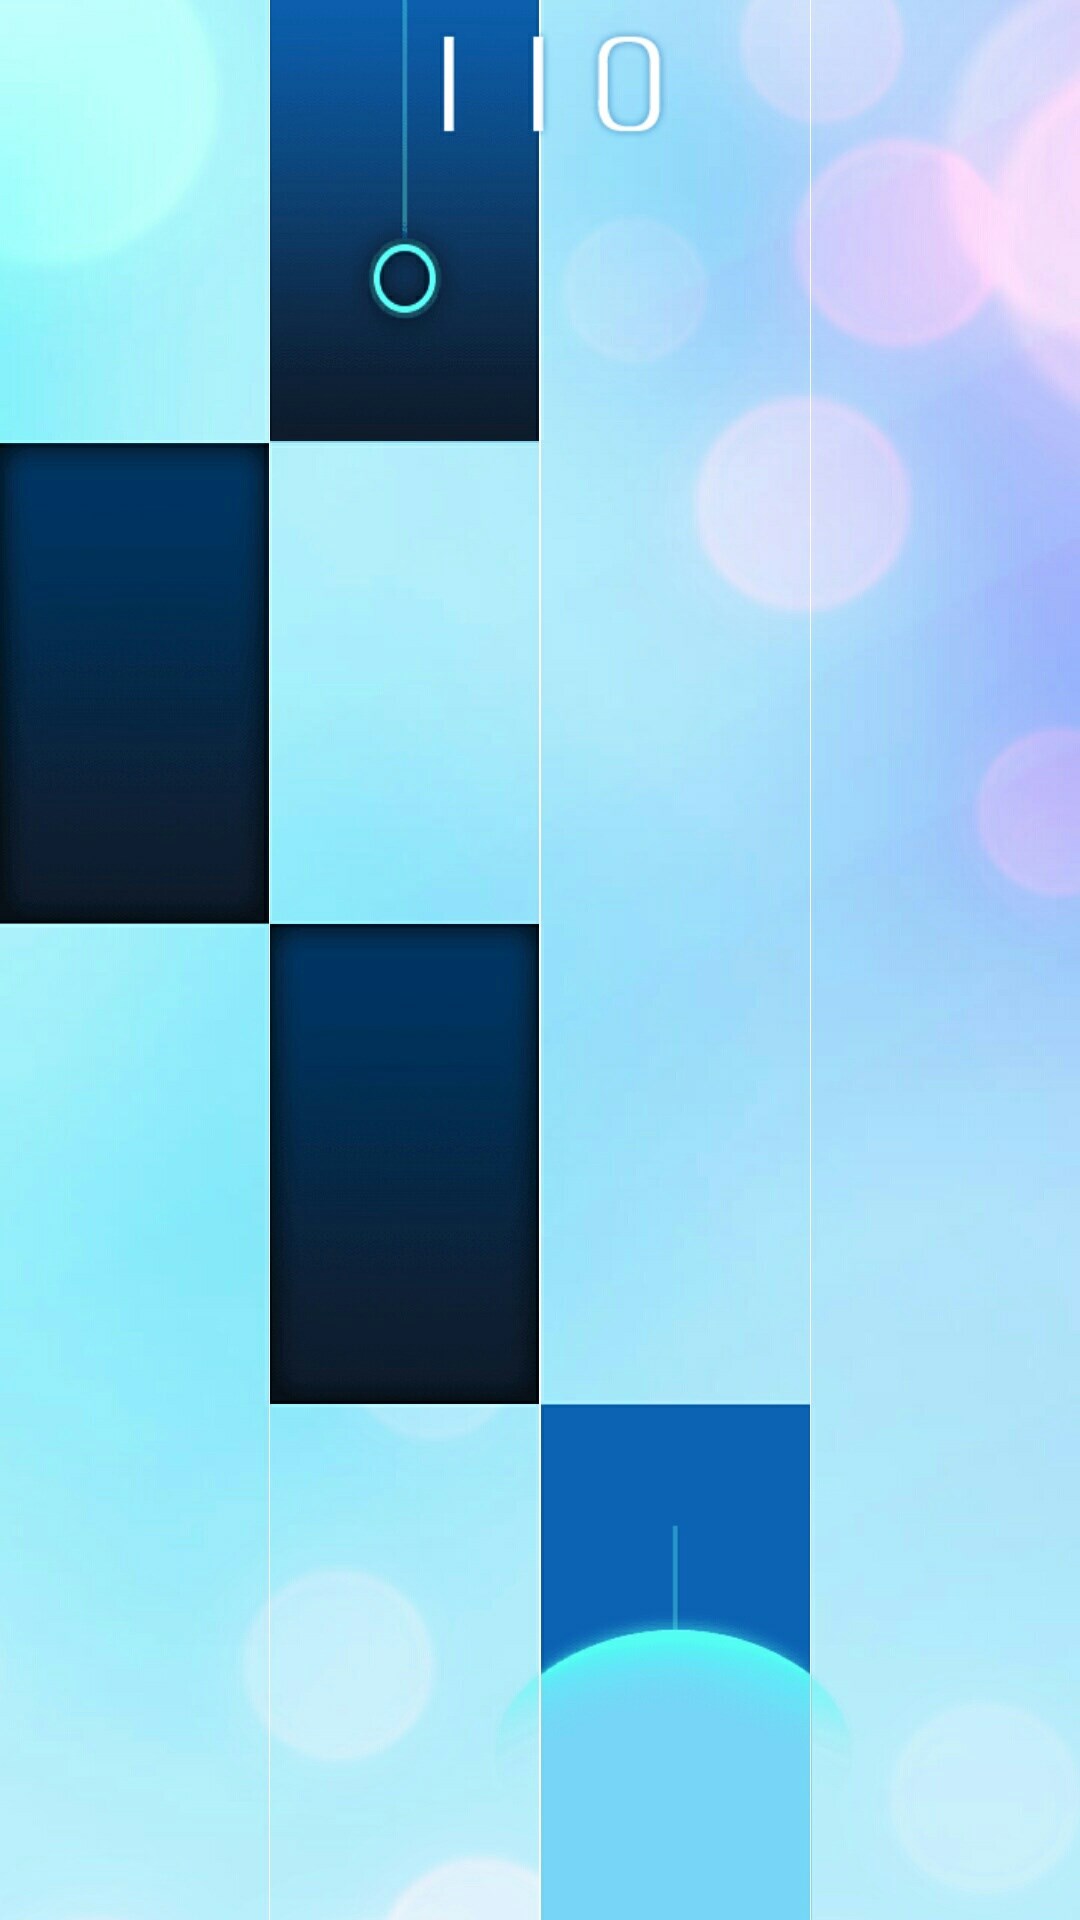 for iphone download Piano Game Classic - Challenge Music Tiles